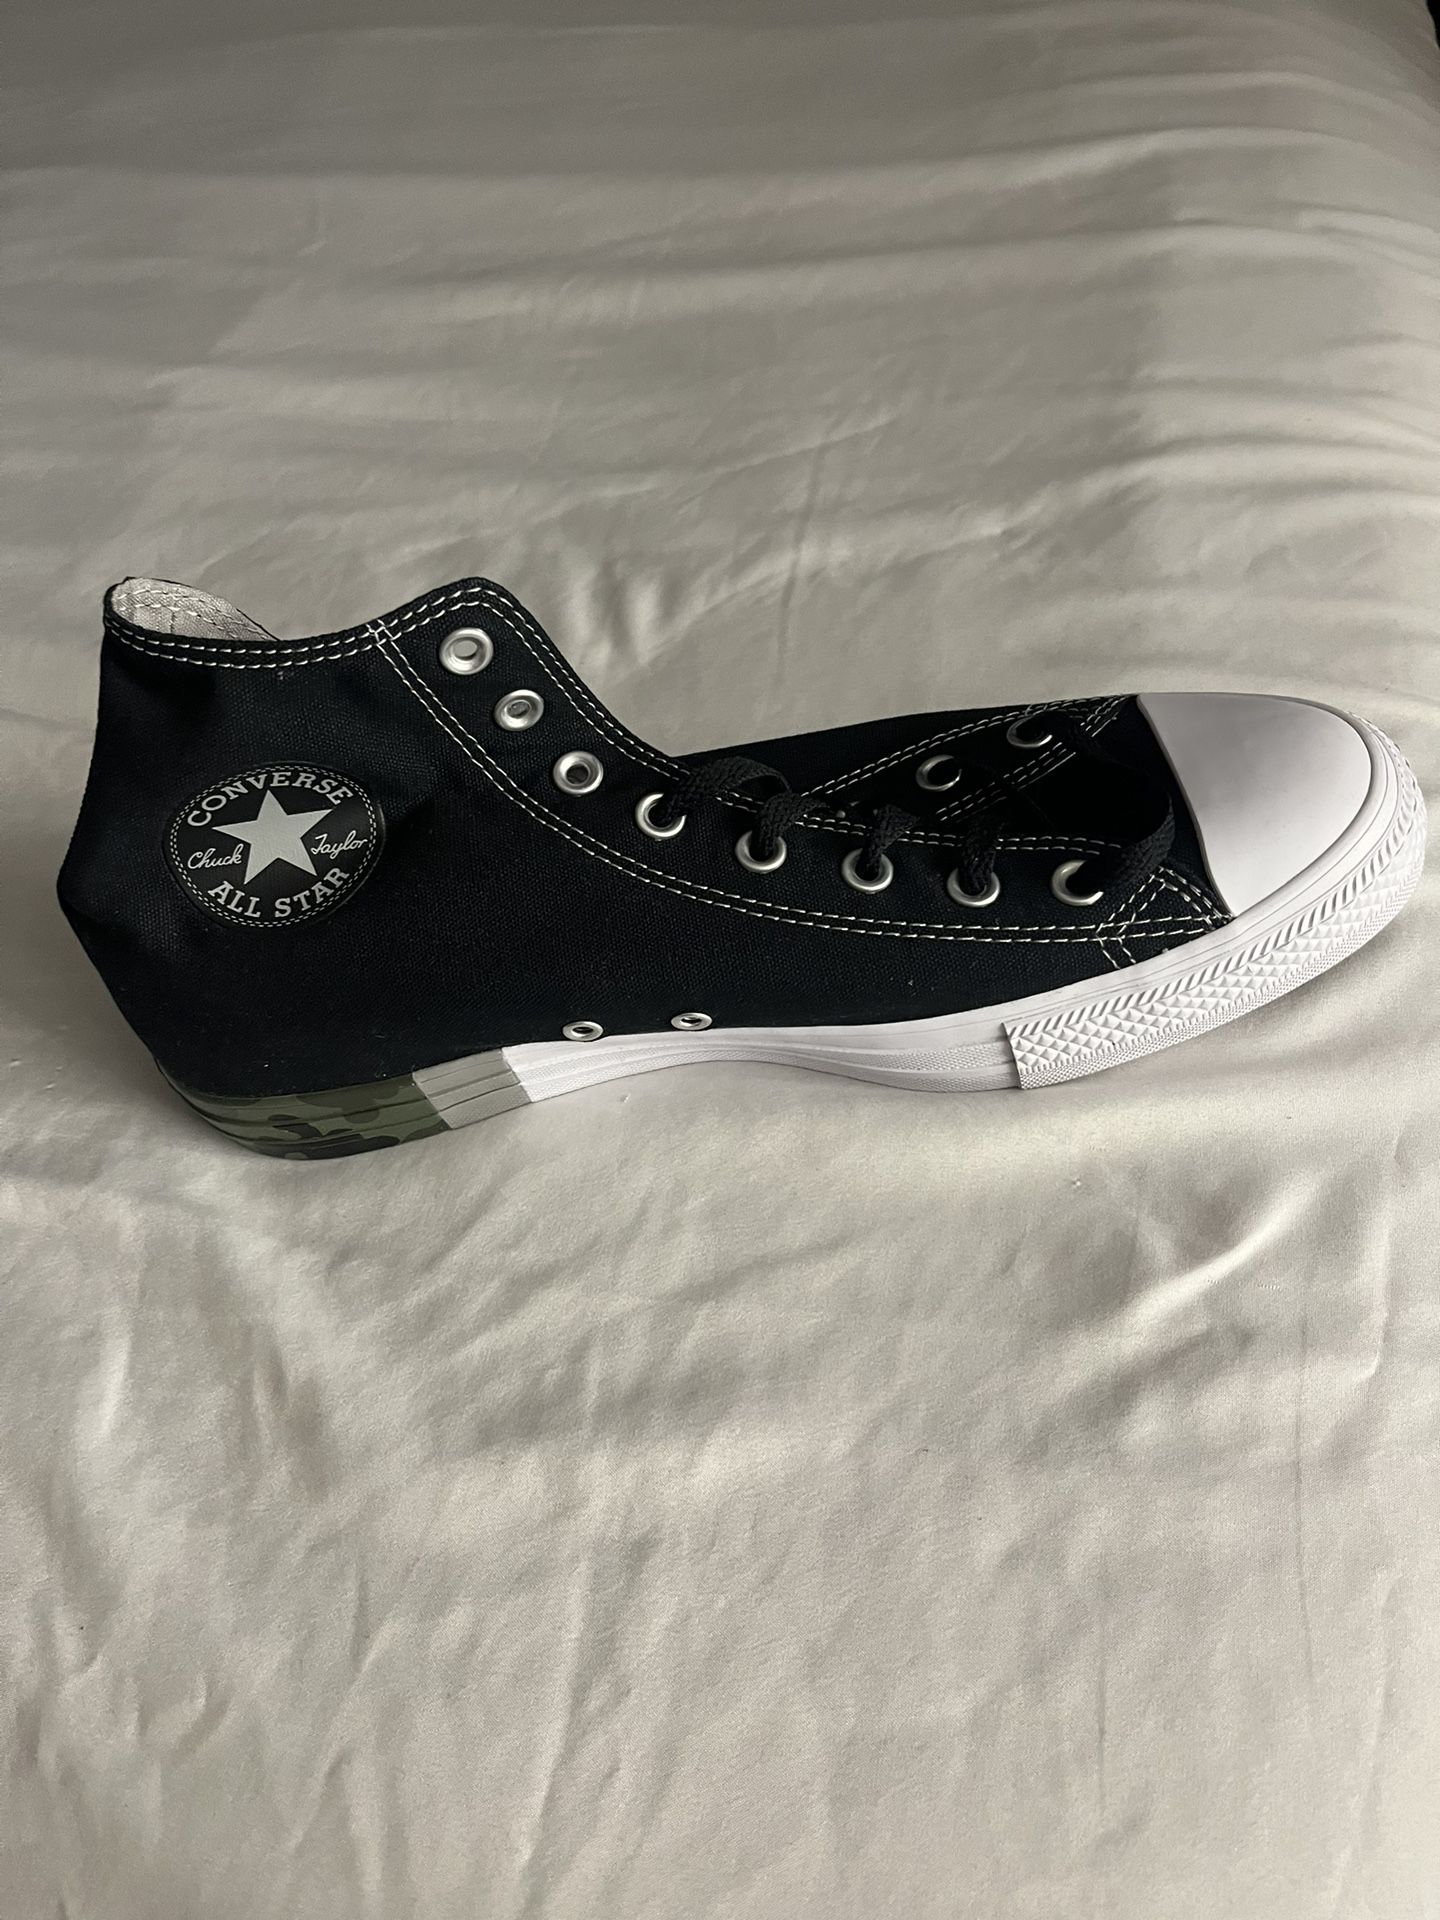 Converse Hi Shoes Brand New Size 10 